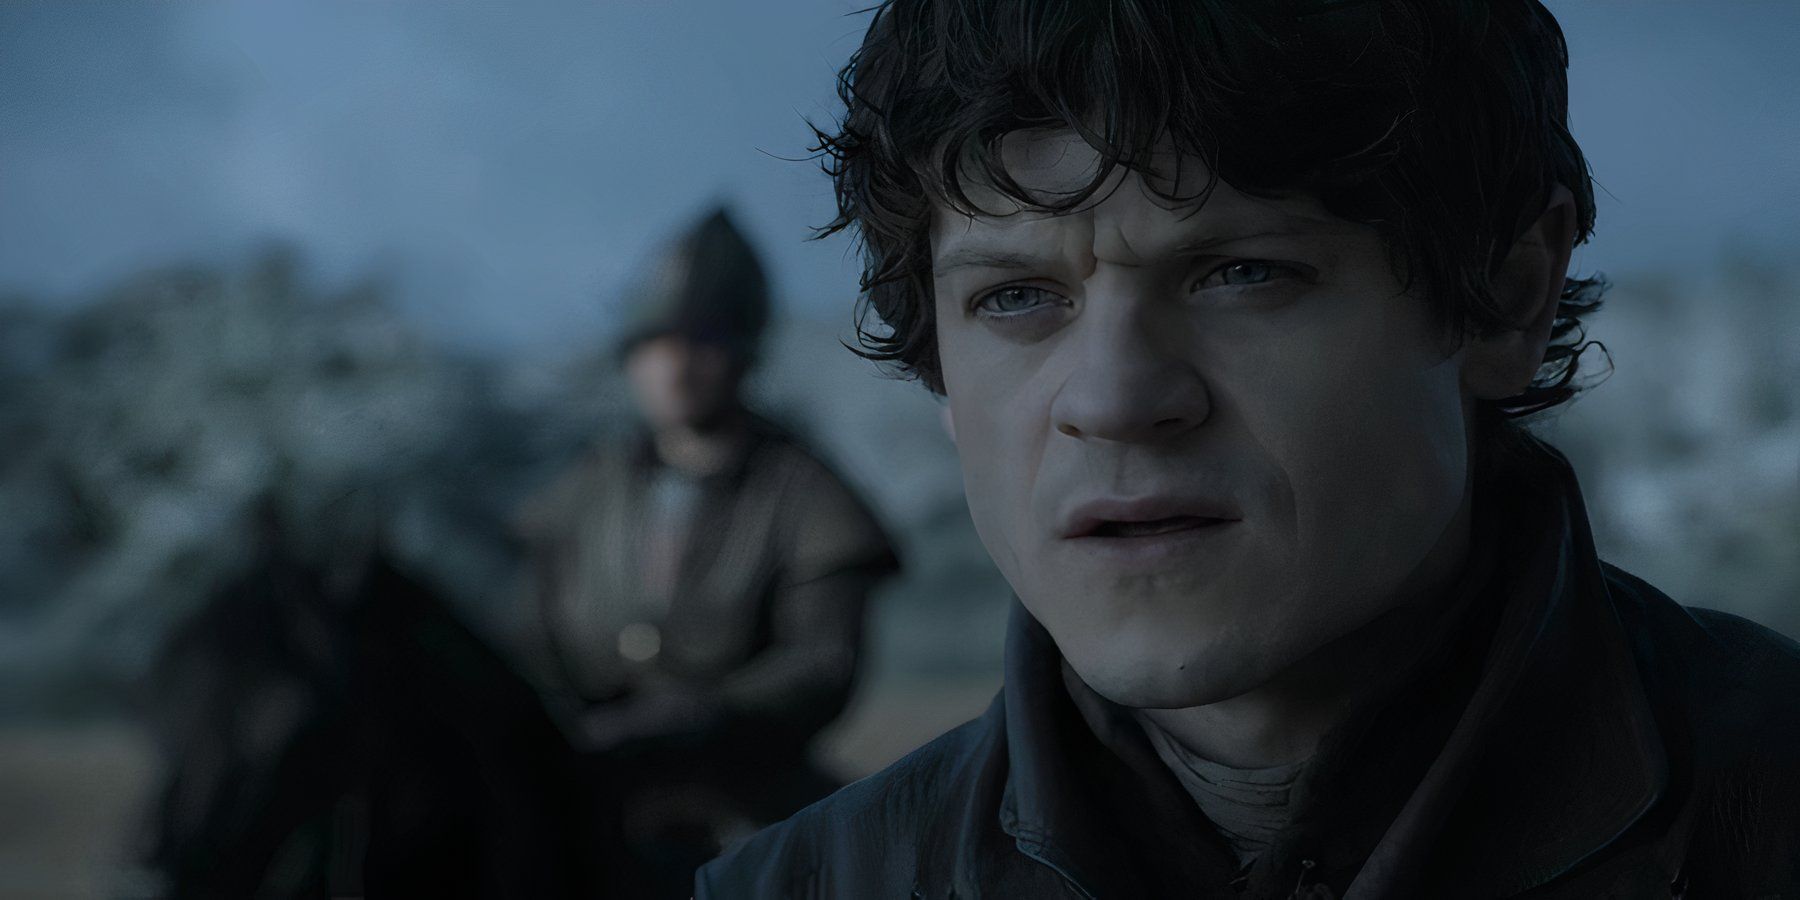 Ramsay Bolton meeting Jon Snow before the Battle of the Bastards in Game of Thrones